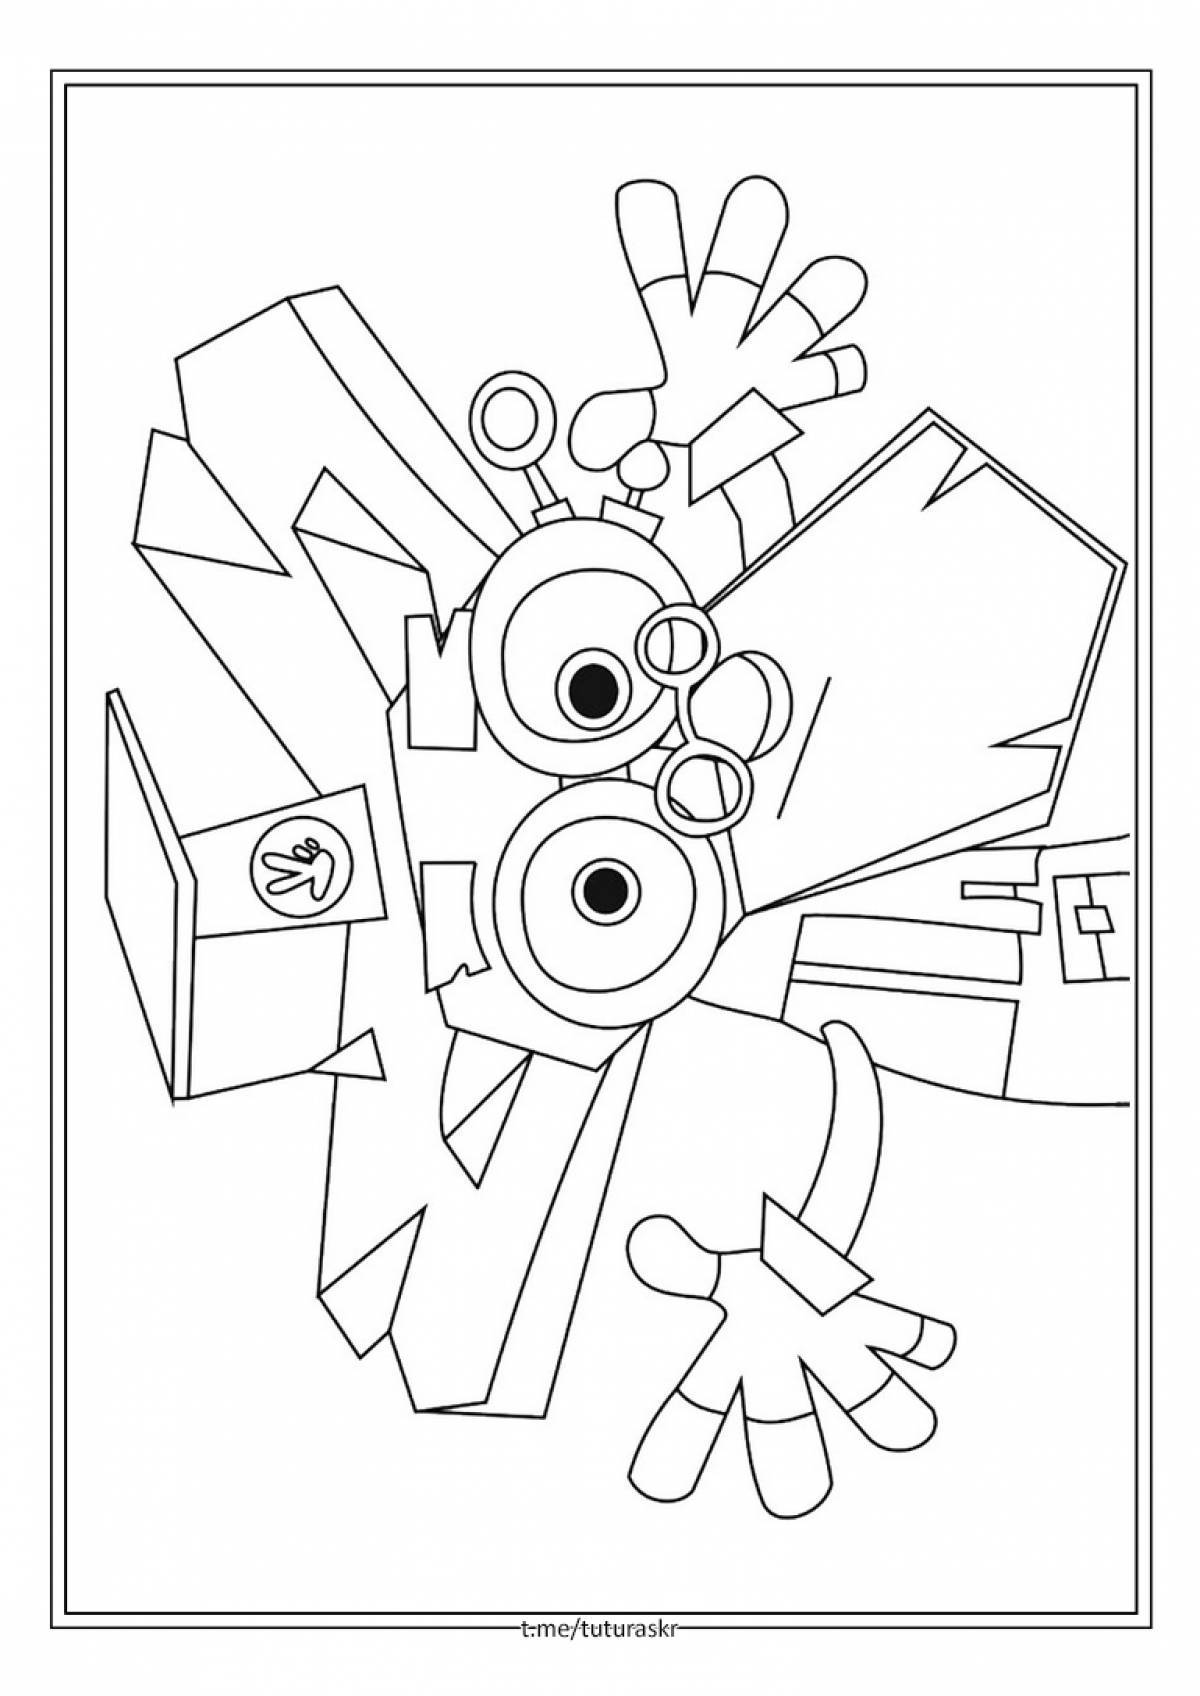 Bright grandfather coloring page